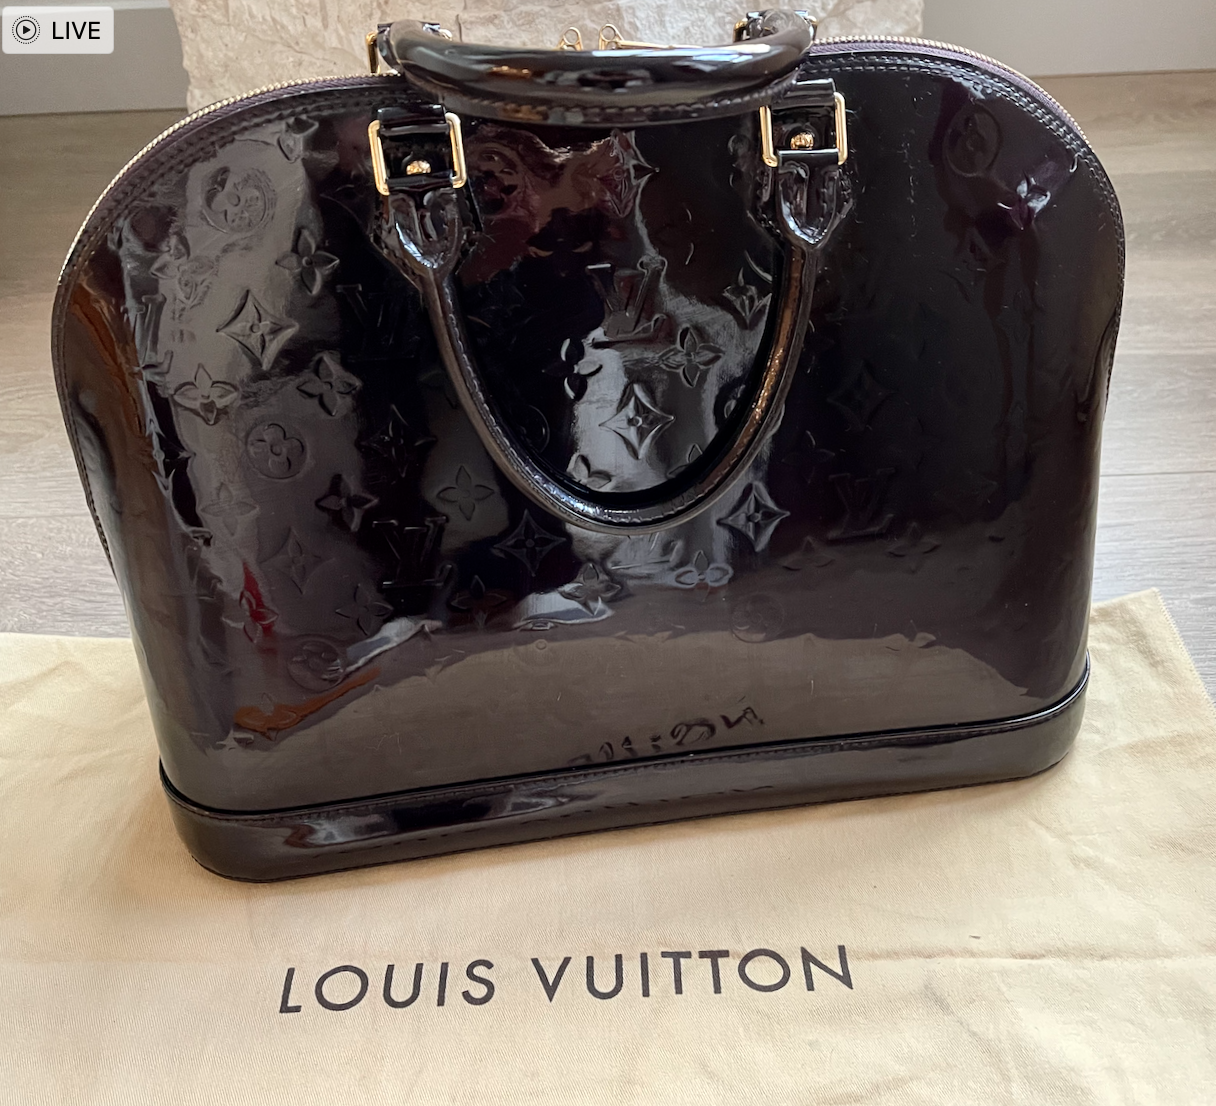 How To Clean Patent Leather - Louis Vuitton Alma Vernis 